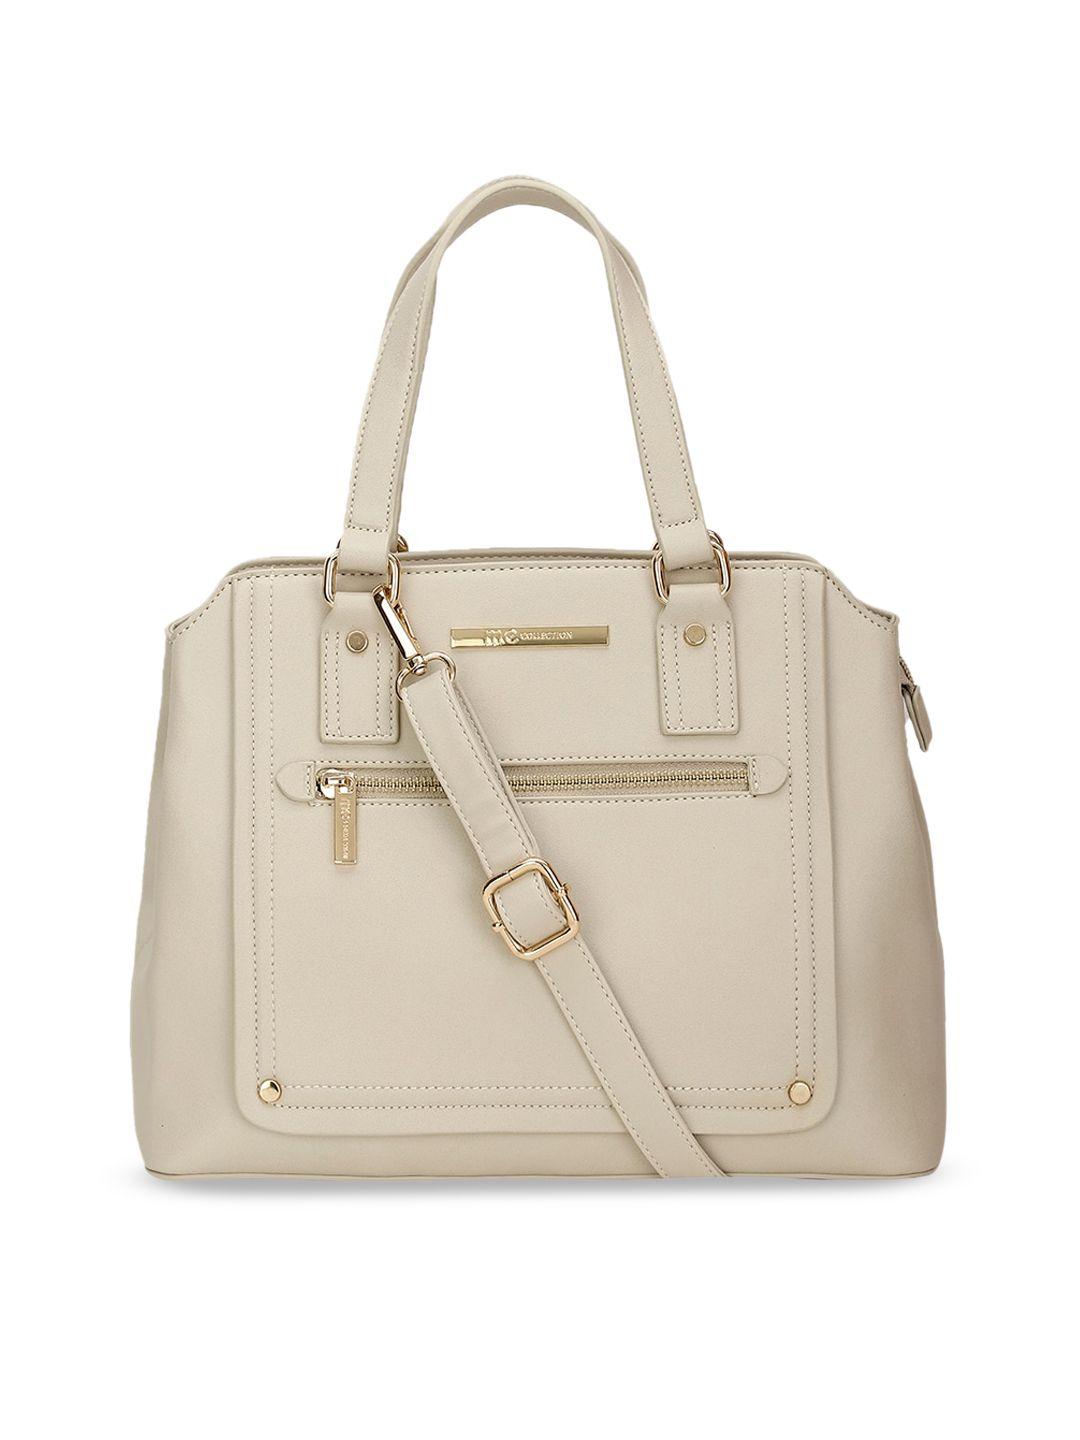 marie claire beige structured handheld bag